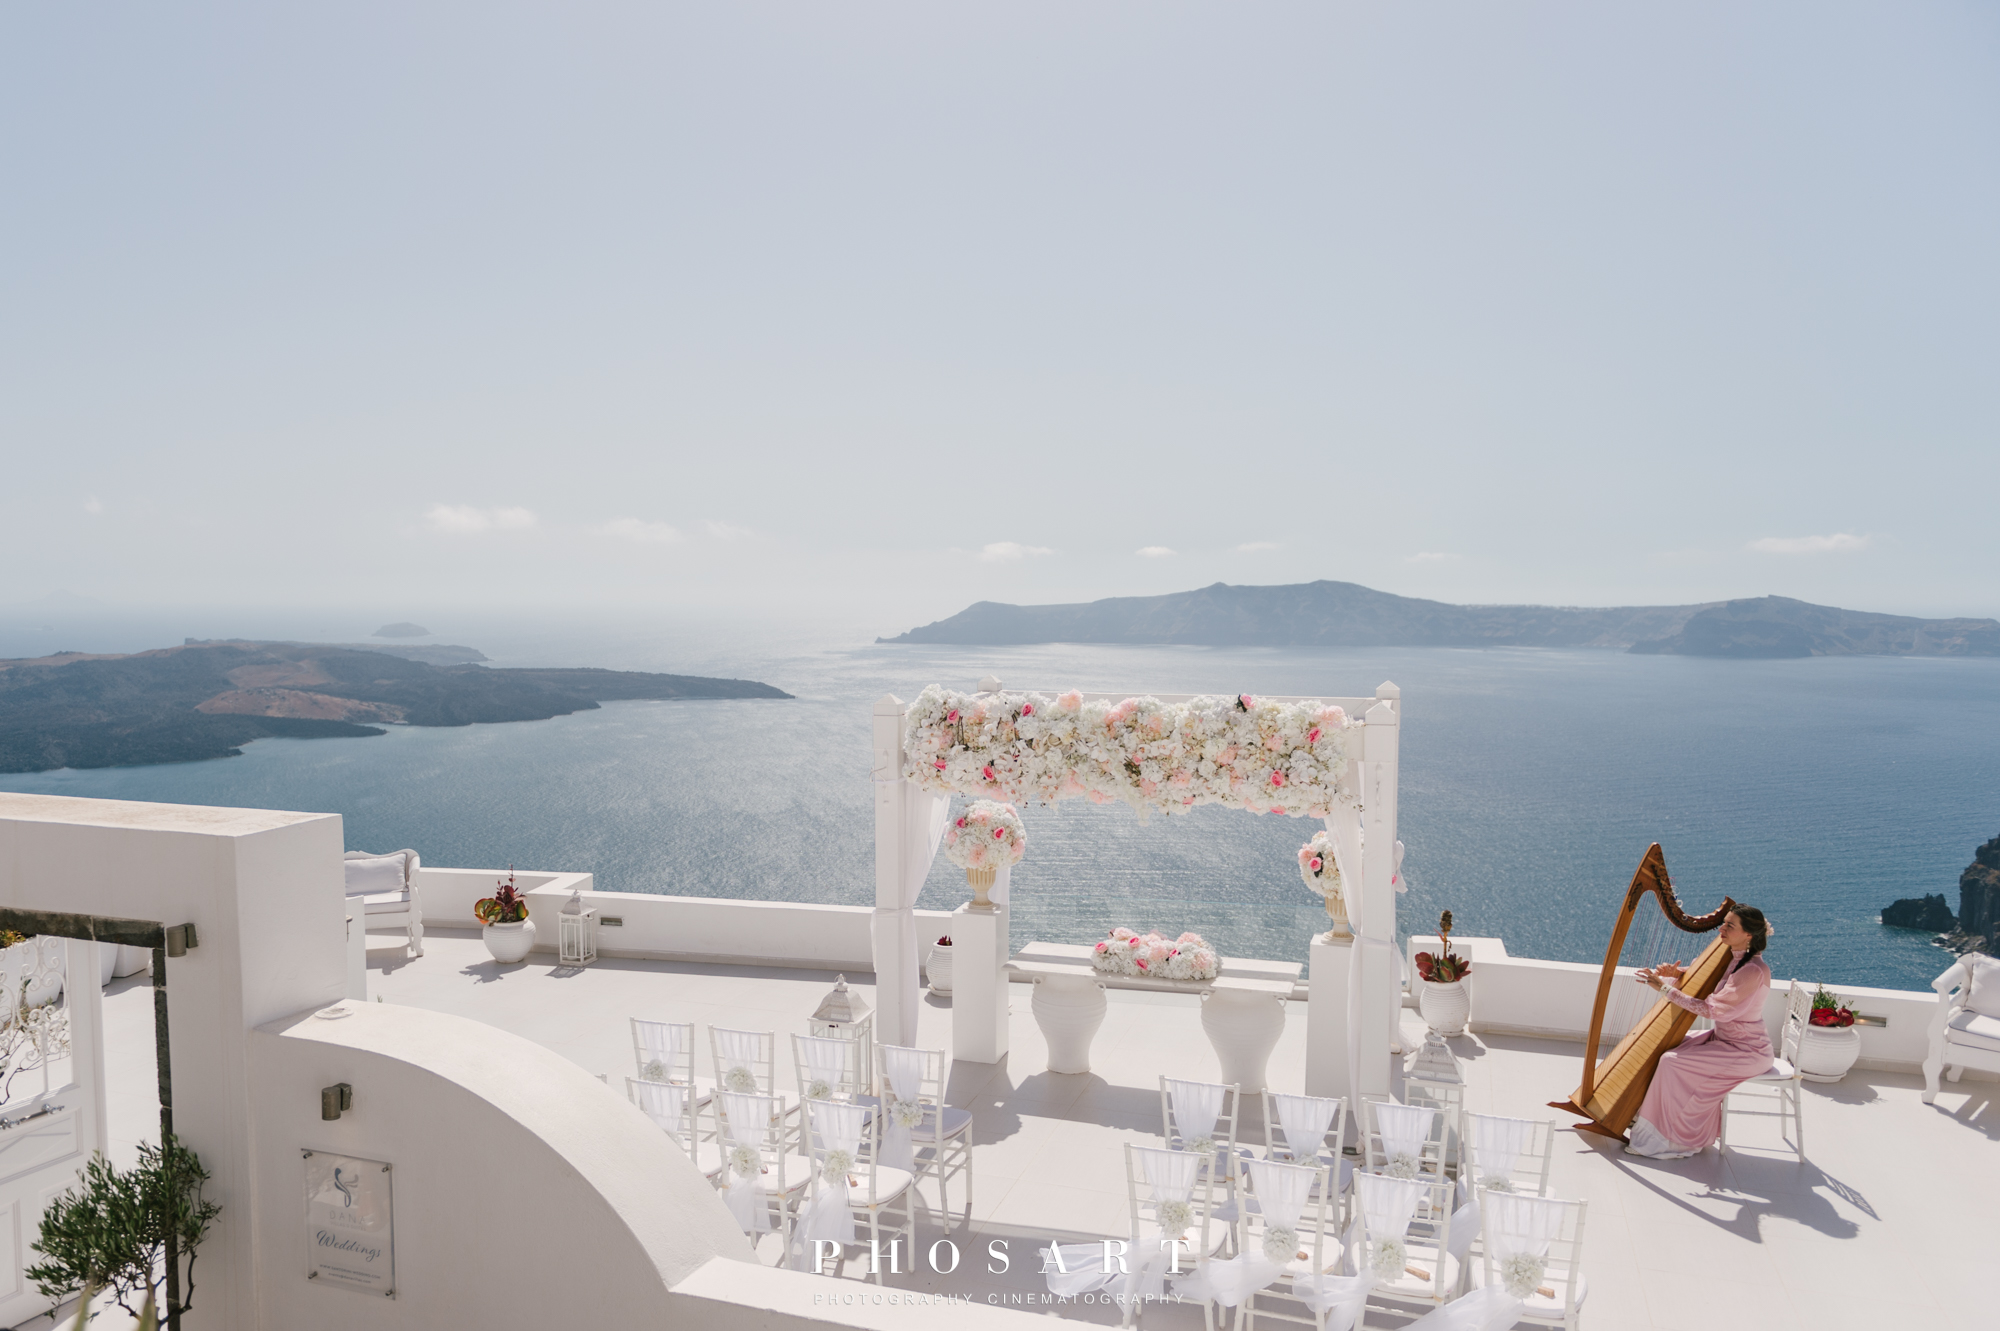 Dana Villas' large terrace above the caldera decorated with white furniture and flowers for a wedding ceremony